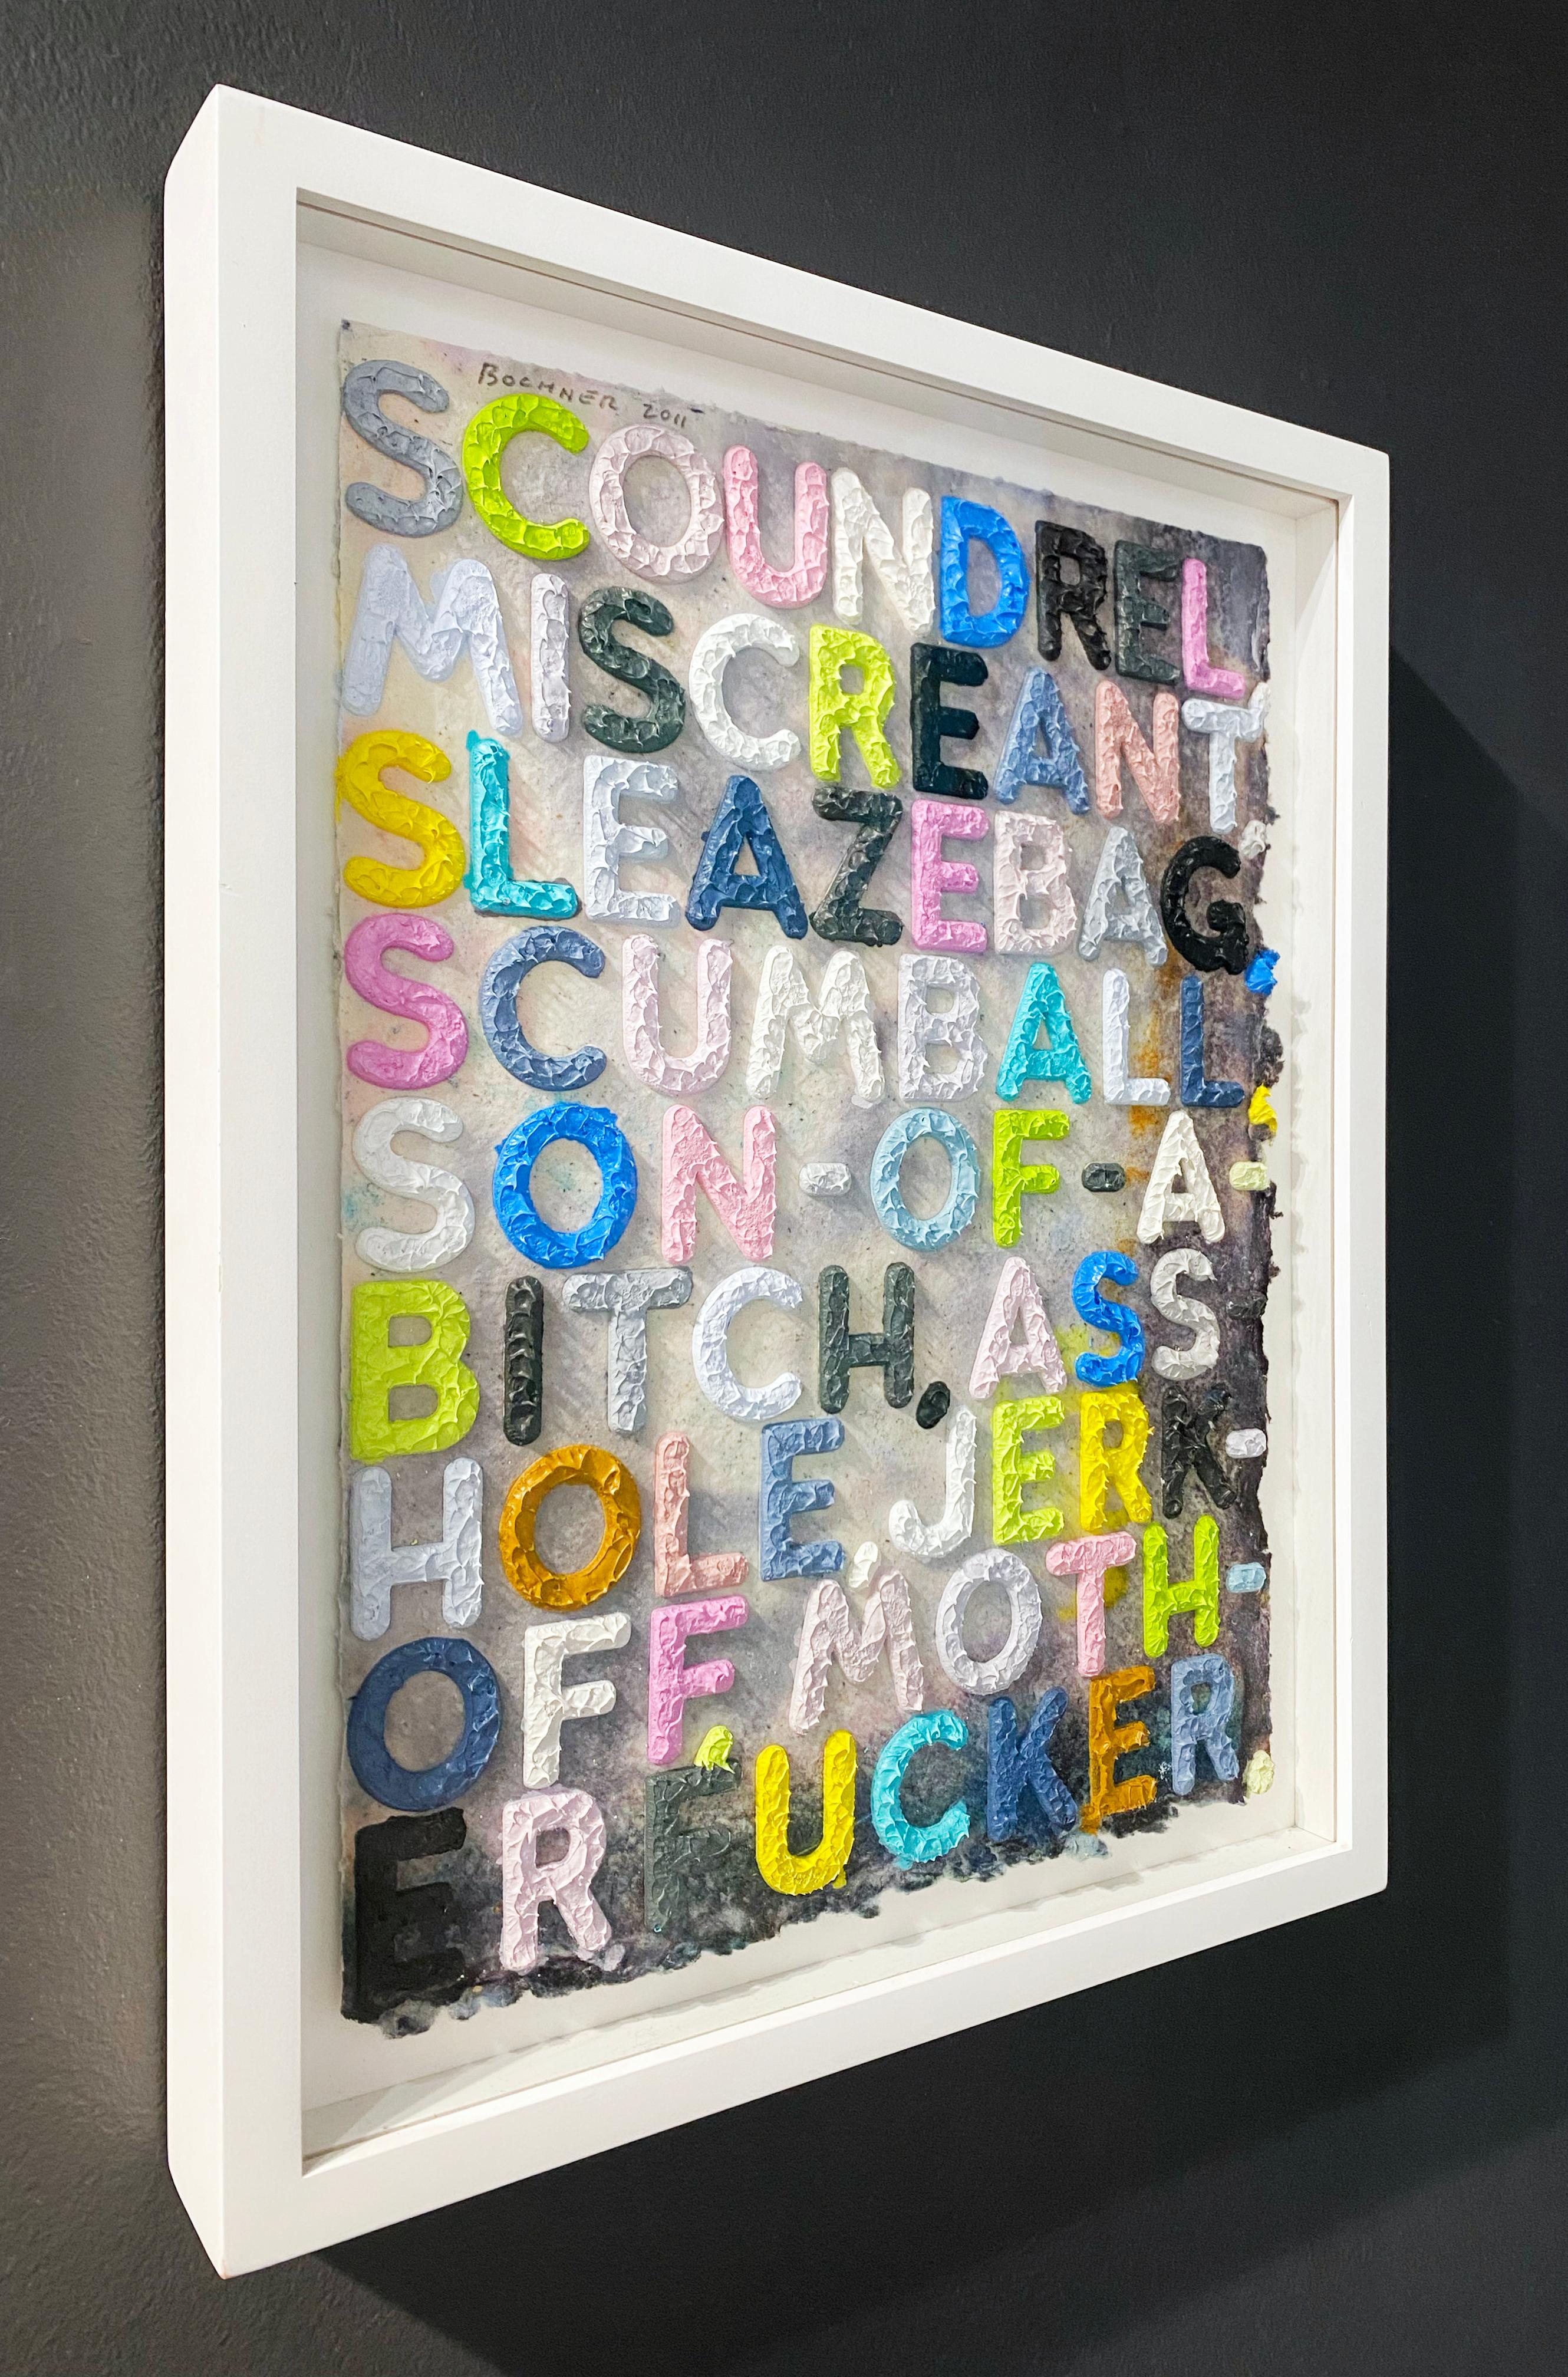 Artist:  Bochner, Mel
Title:  Scoundrel
Date:  2011
Medium:  Monoprint with collage, engraving and embossment on hand-dyed Twinrocker handmade paper
Unframed Dimensions:  12